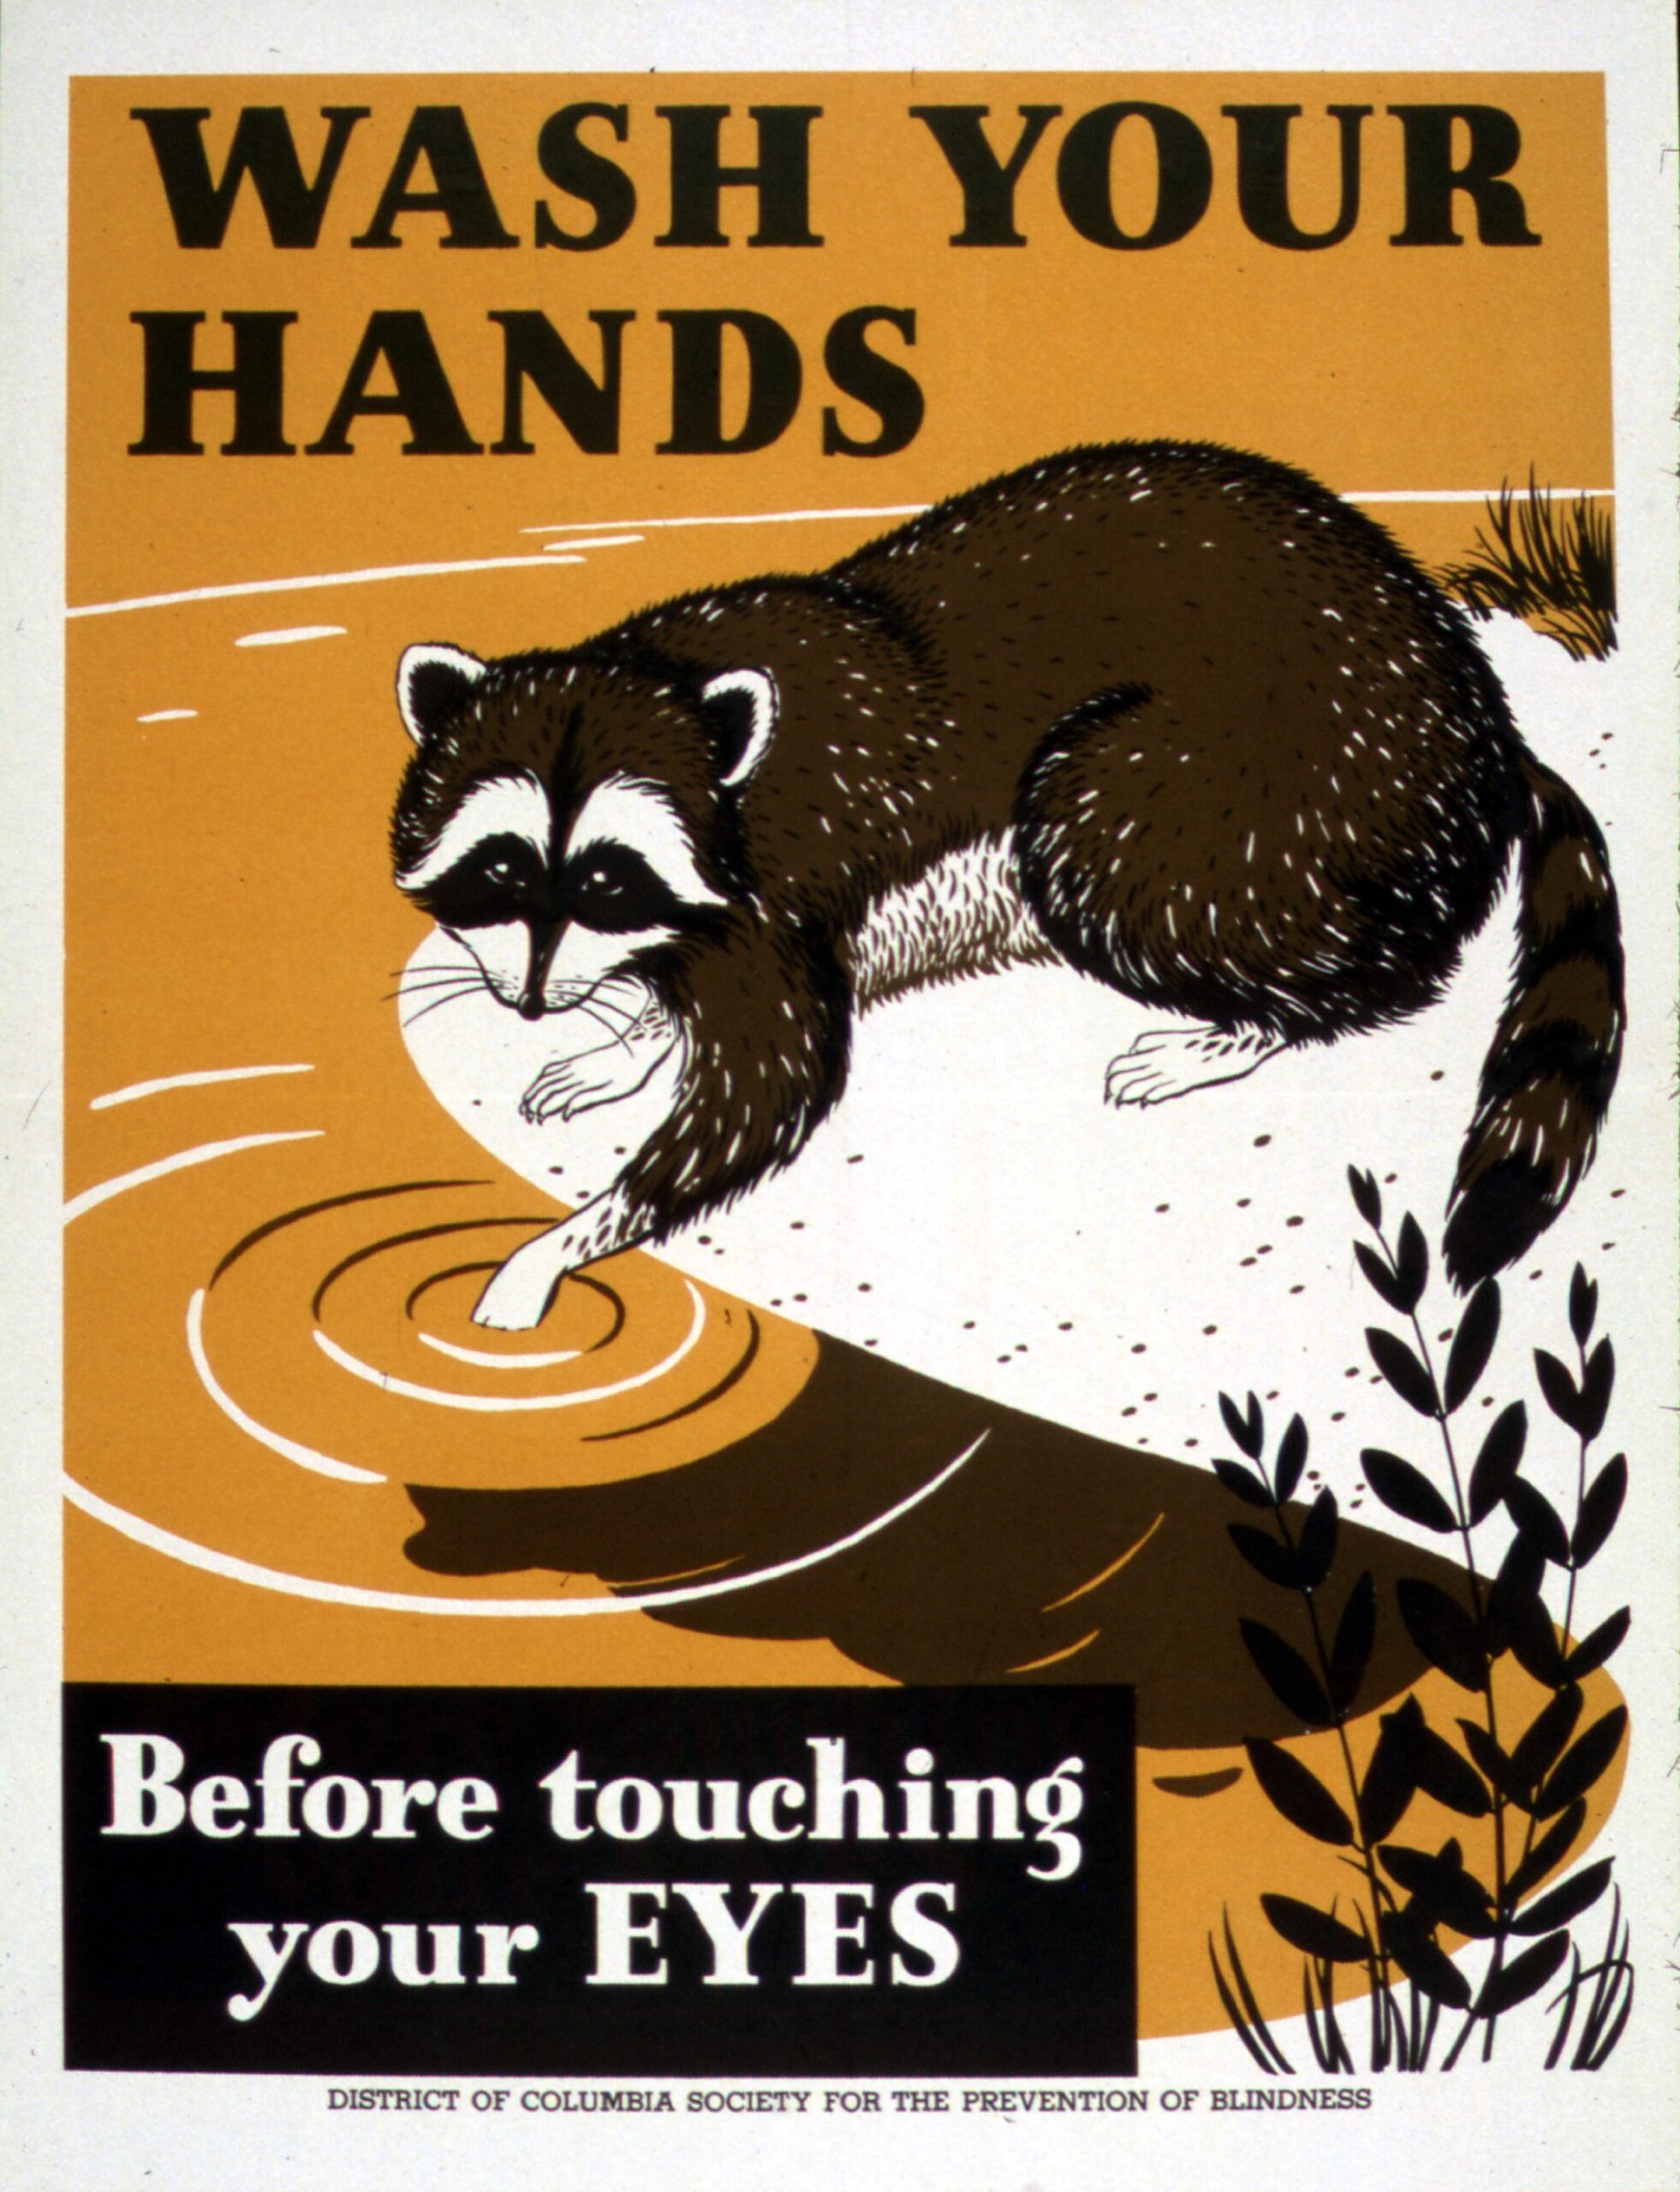 Vintage Public Health Posters That Helped People Take Smart Precautions During Past Crises Open Culture picture image